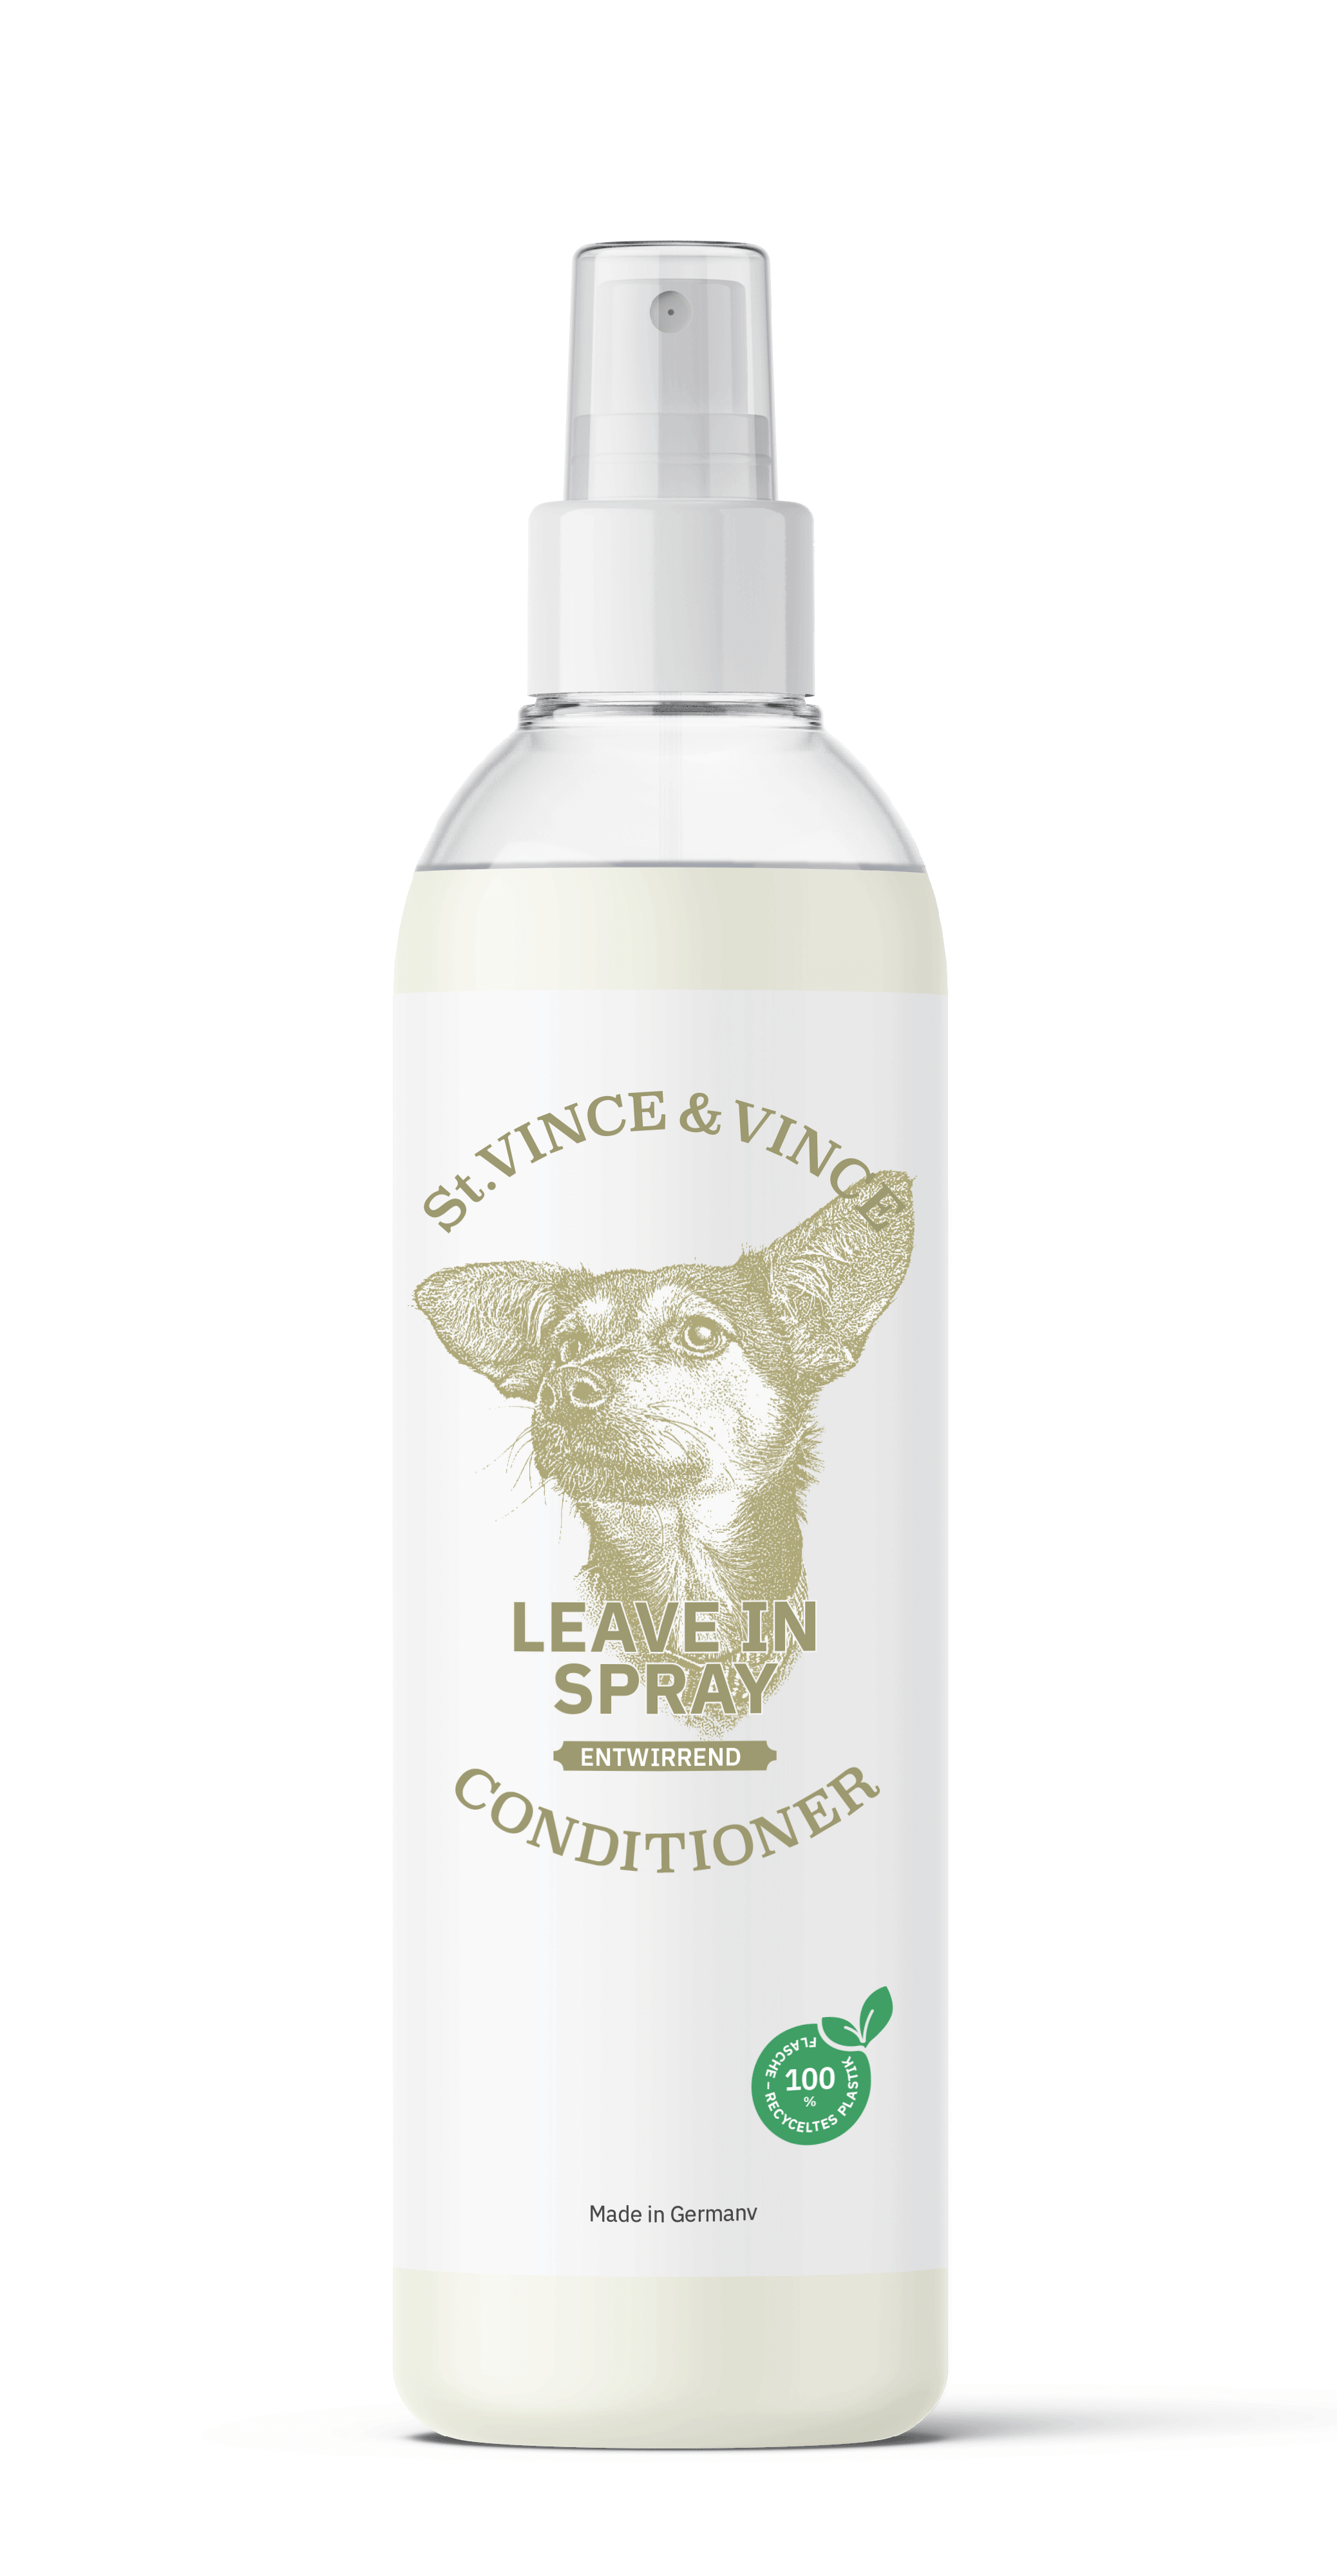 St.Vince Good Conditioner: Leave in Spray 250ml